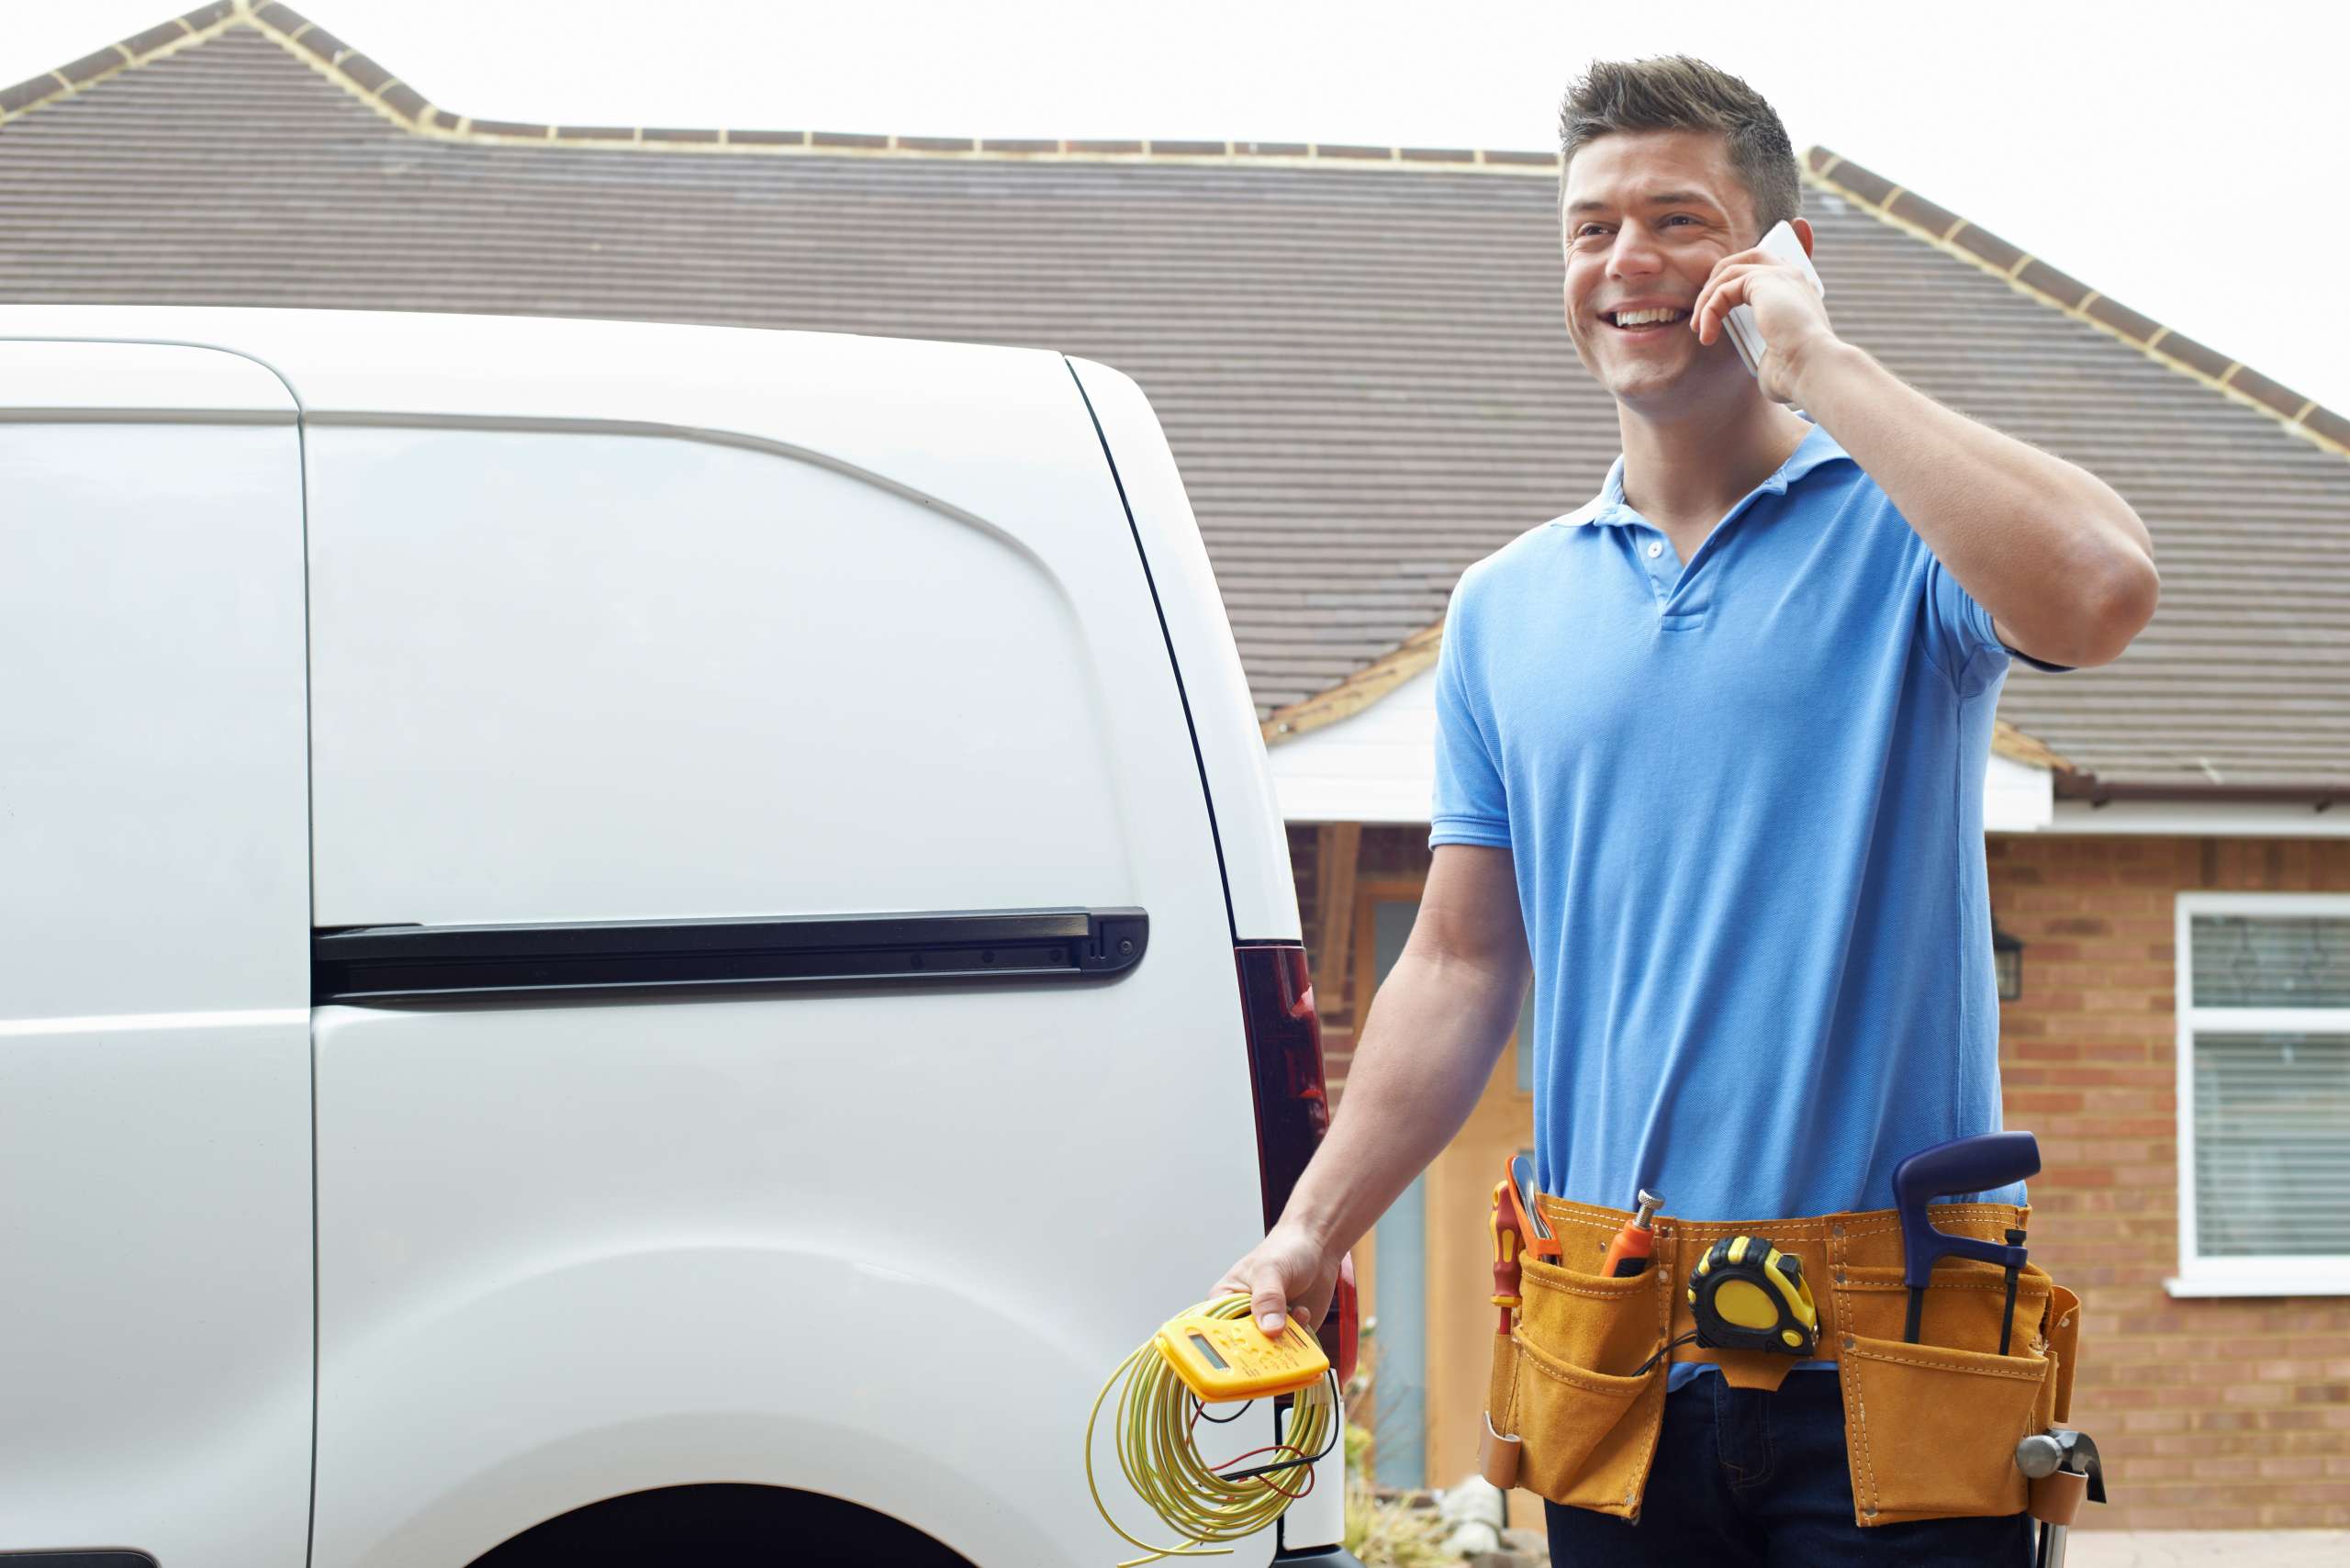 An electrician standing next to a vehicle